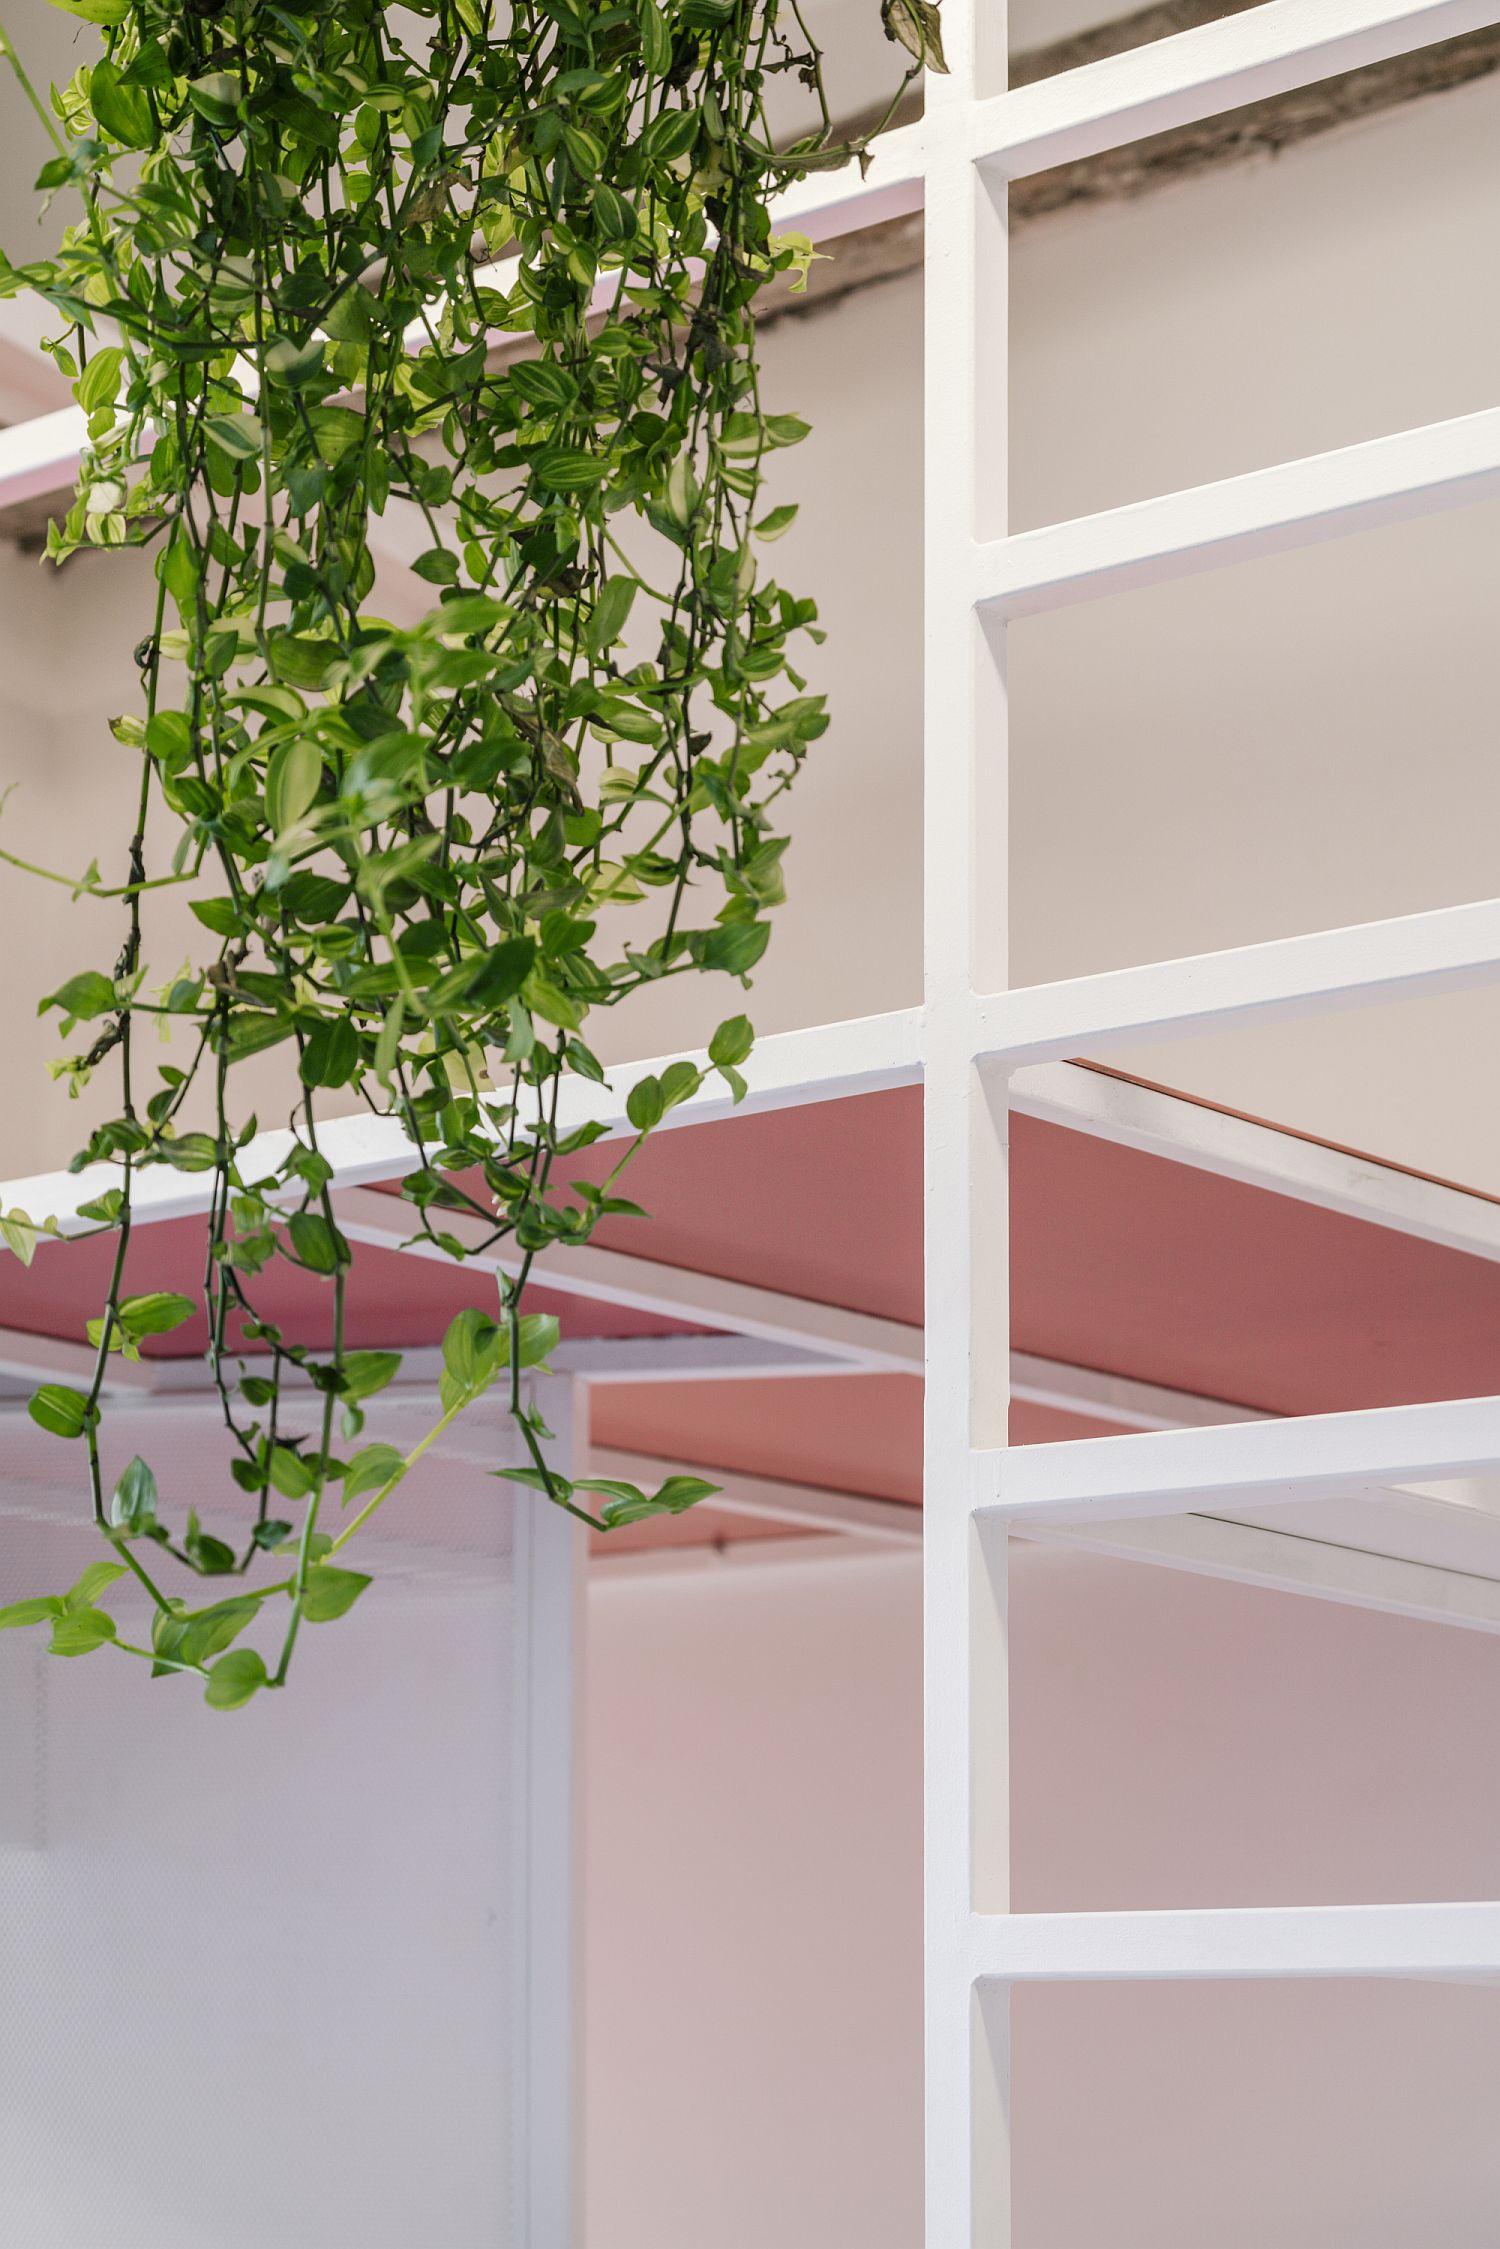 Hanging plants bring greenery into an apartment filled with white and pops if light pink